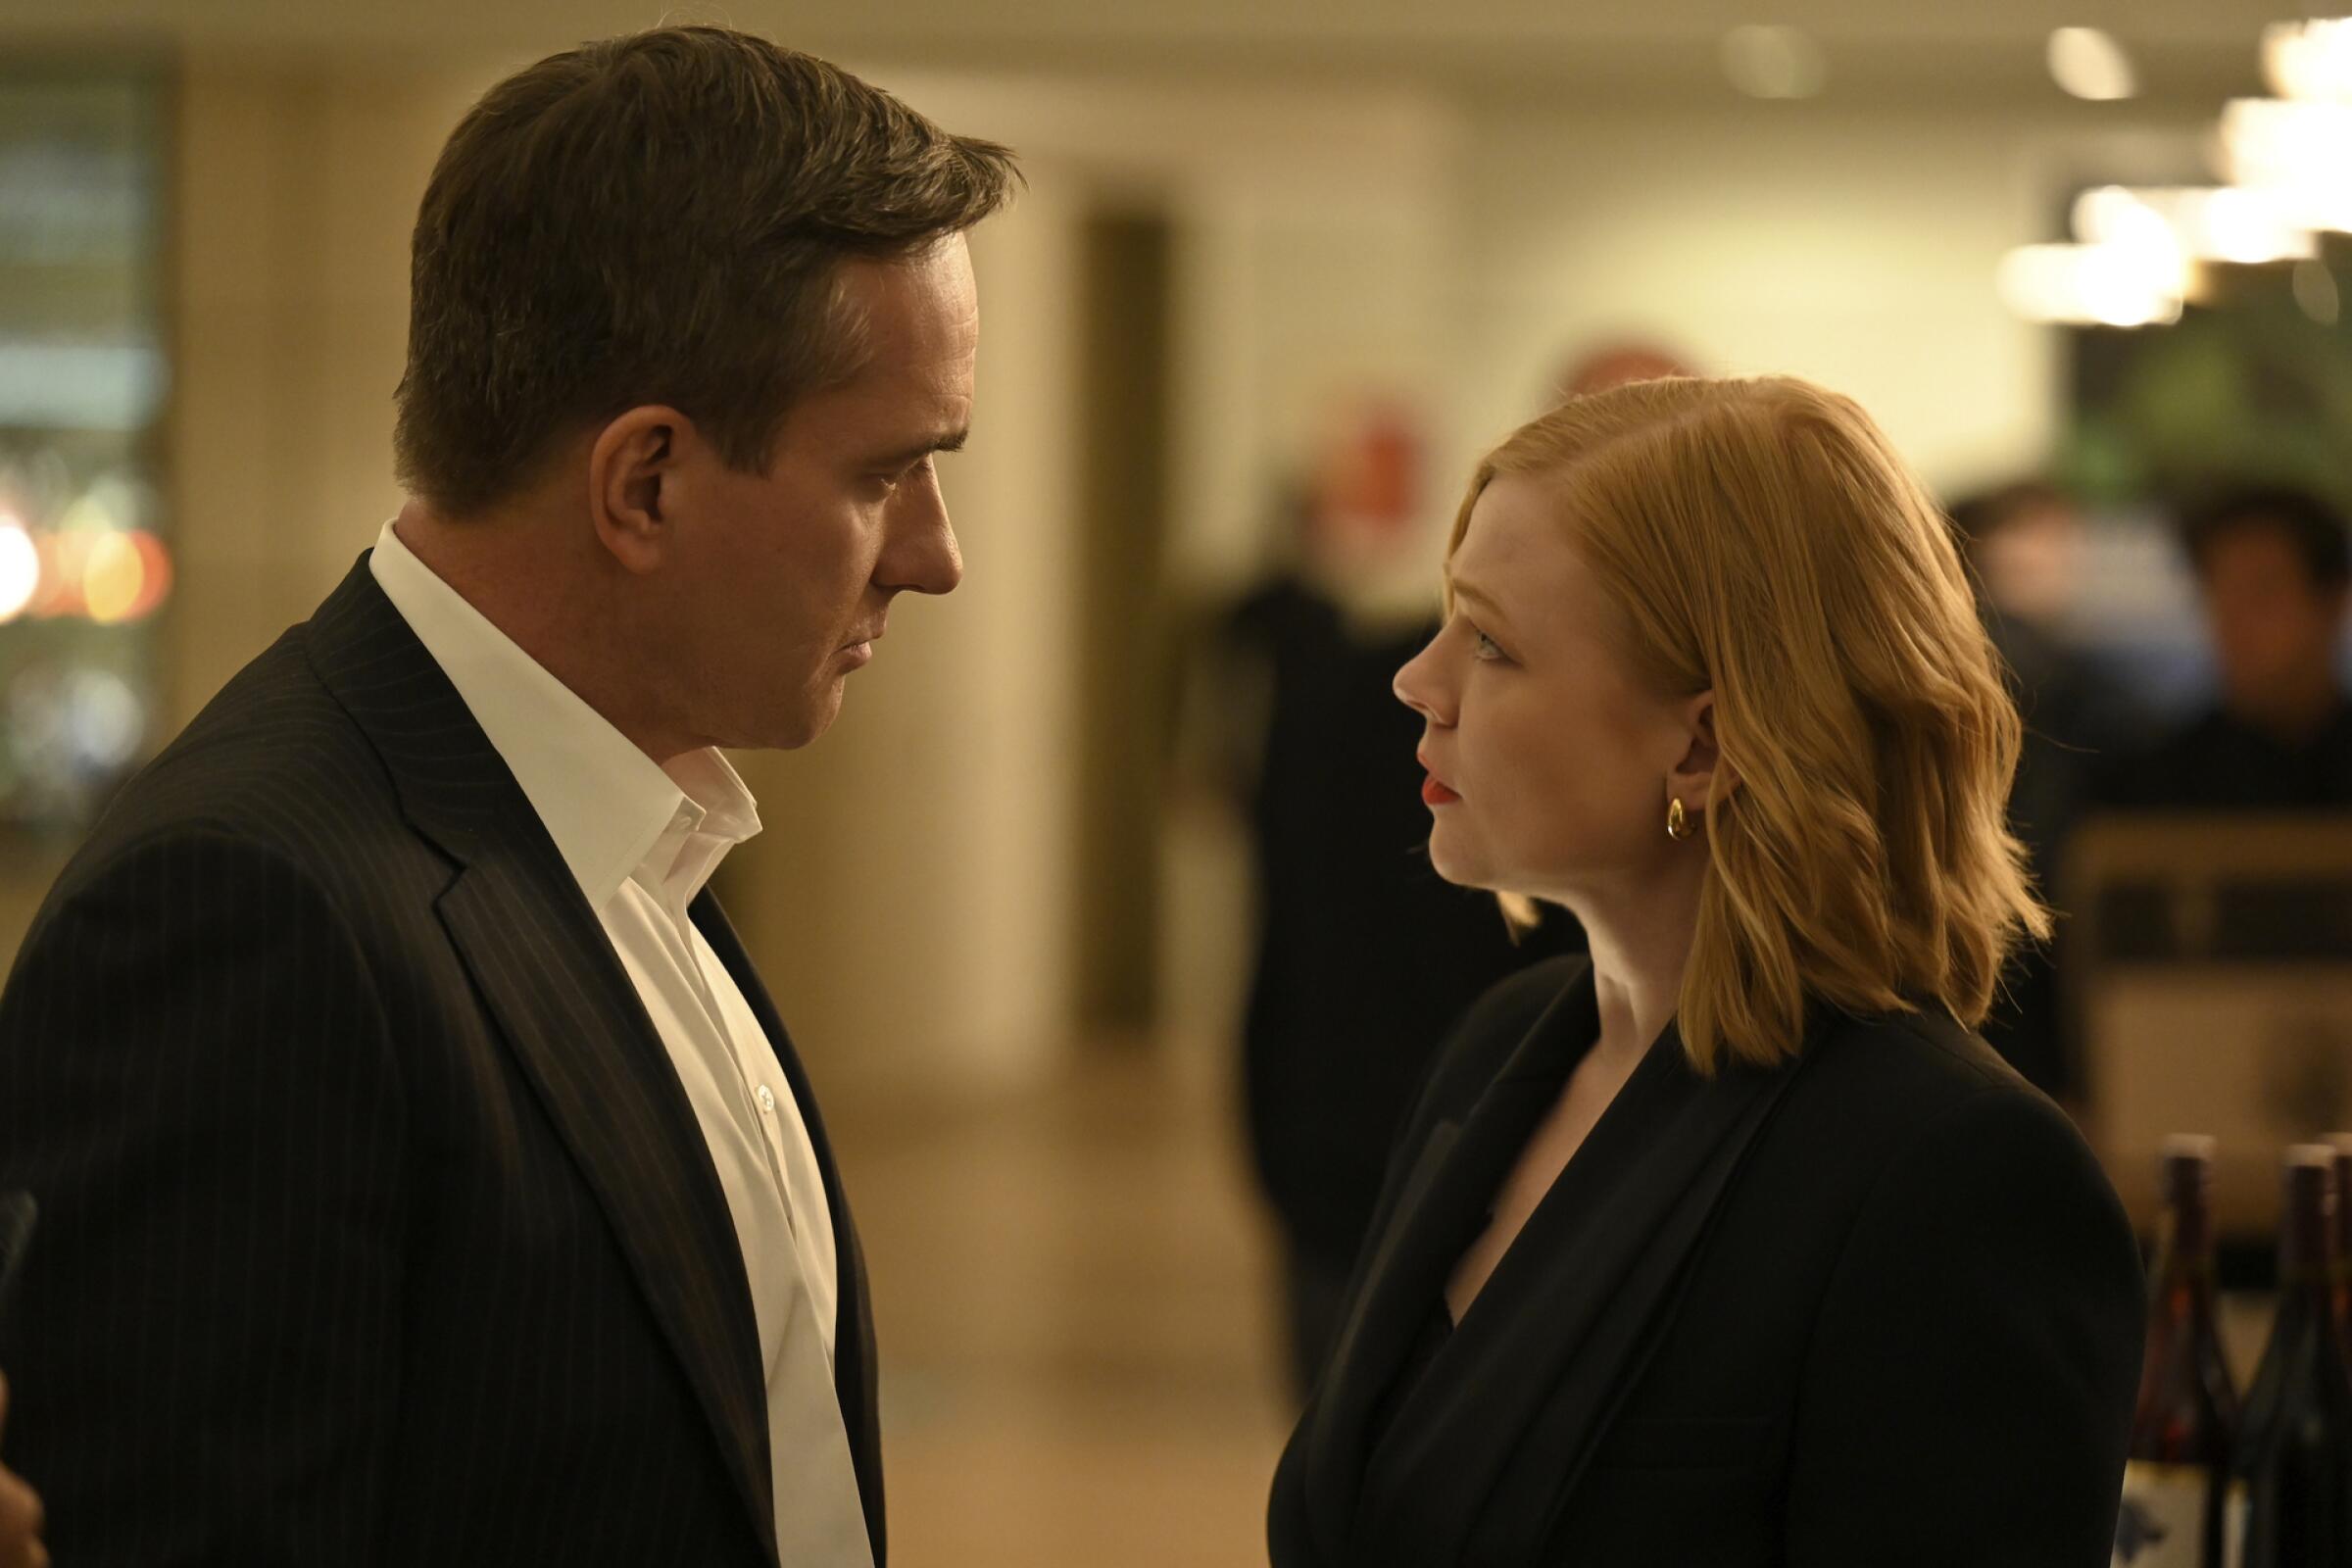 A well-dressed man and woman stand face to face looking tense in a scene from "Succession."